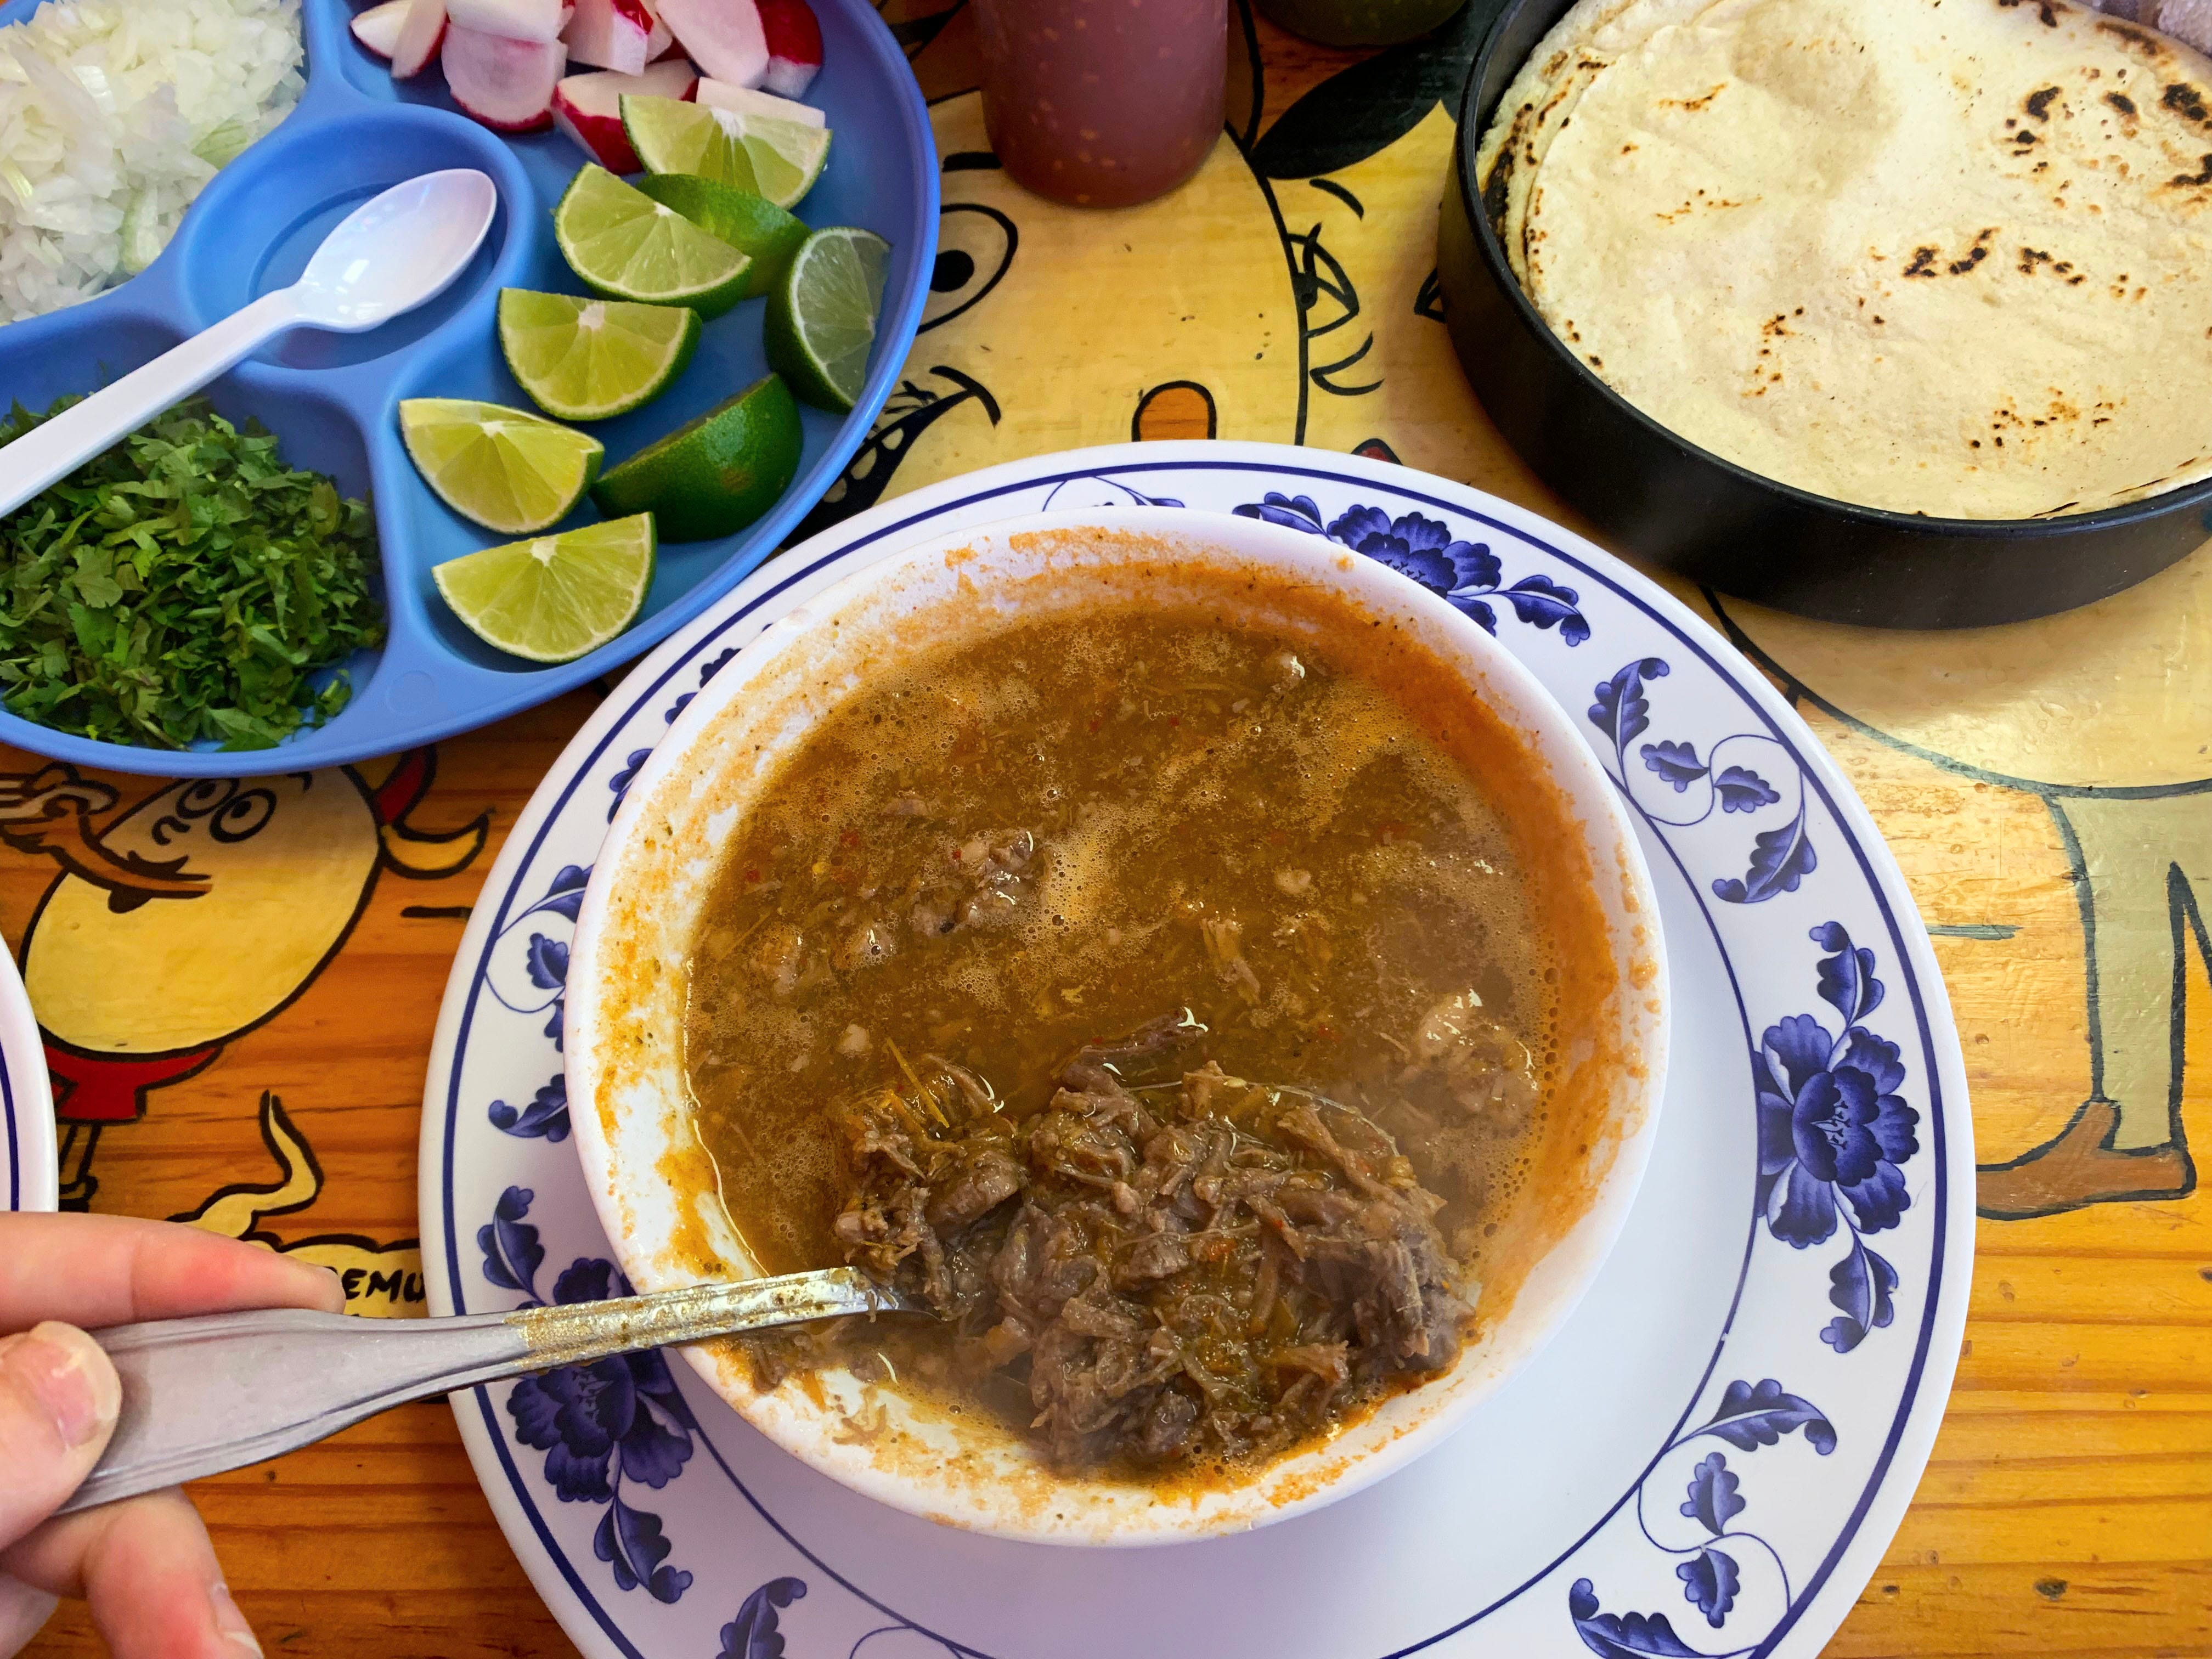 Guide to Mexican food in Glendale: What to order at every restaurant